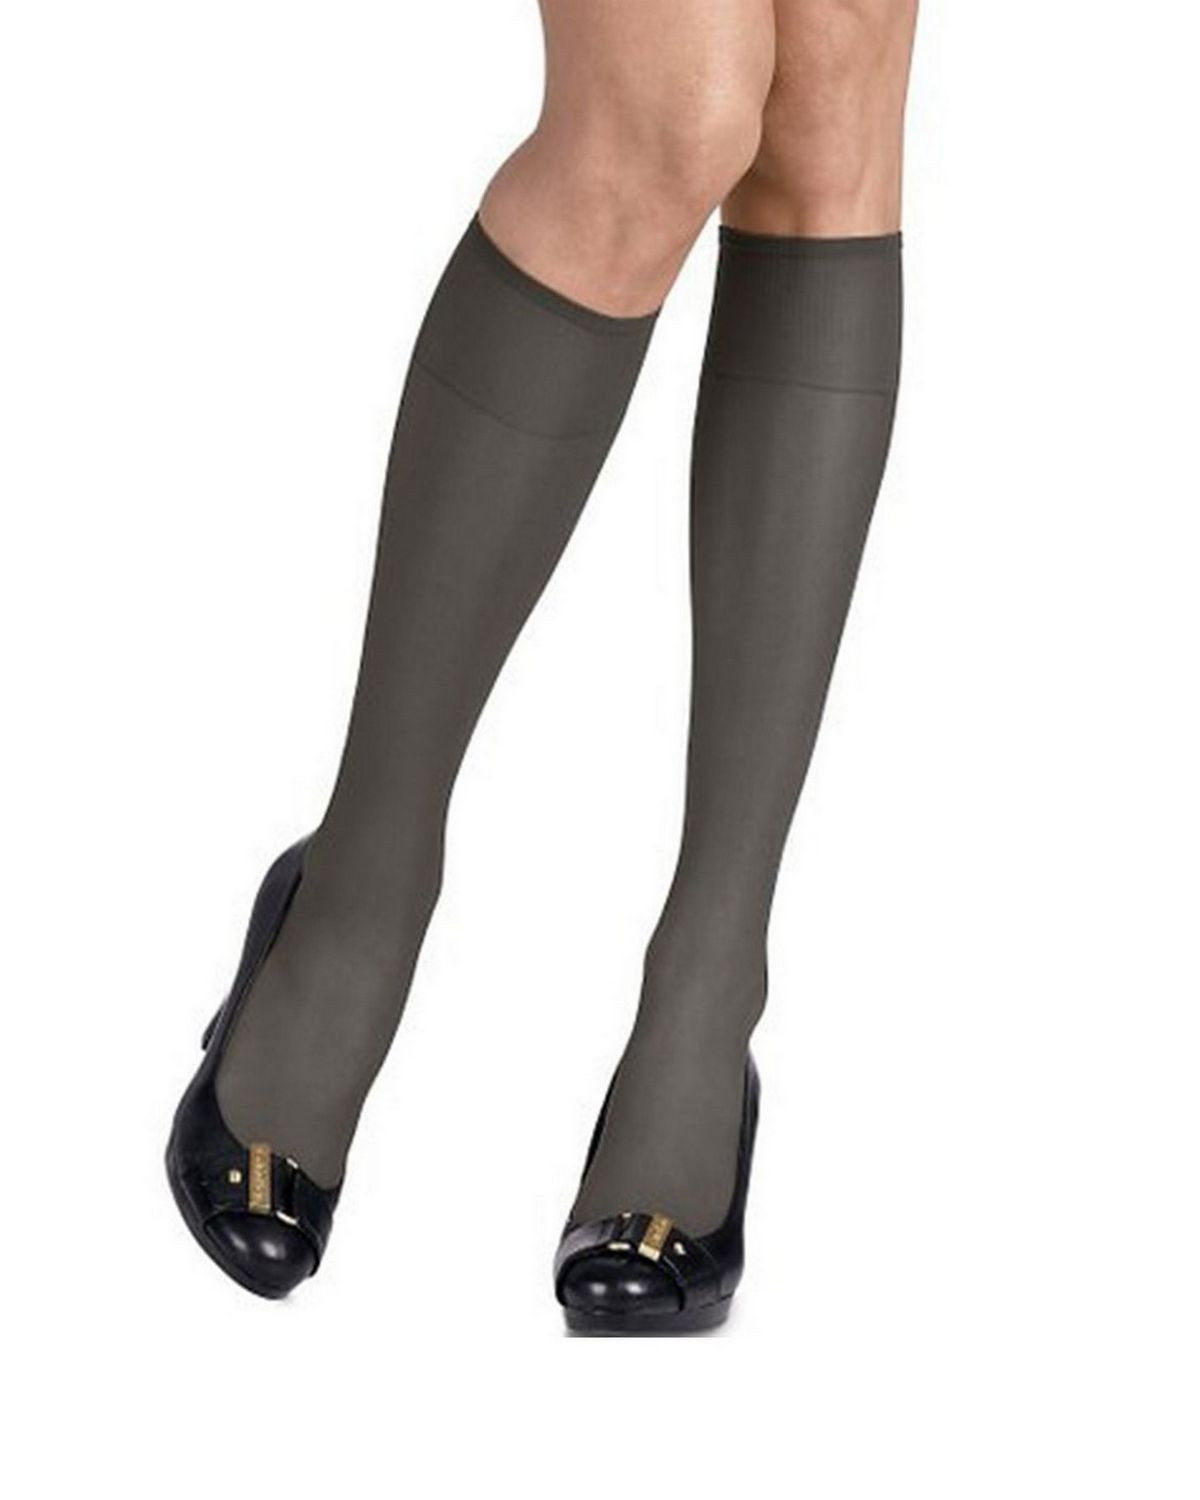 Hanes 725 Women's Silk Reflections Silky Sheer Knee Highs 2-Pack - Jet - One Size #silk